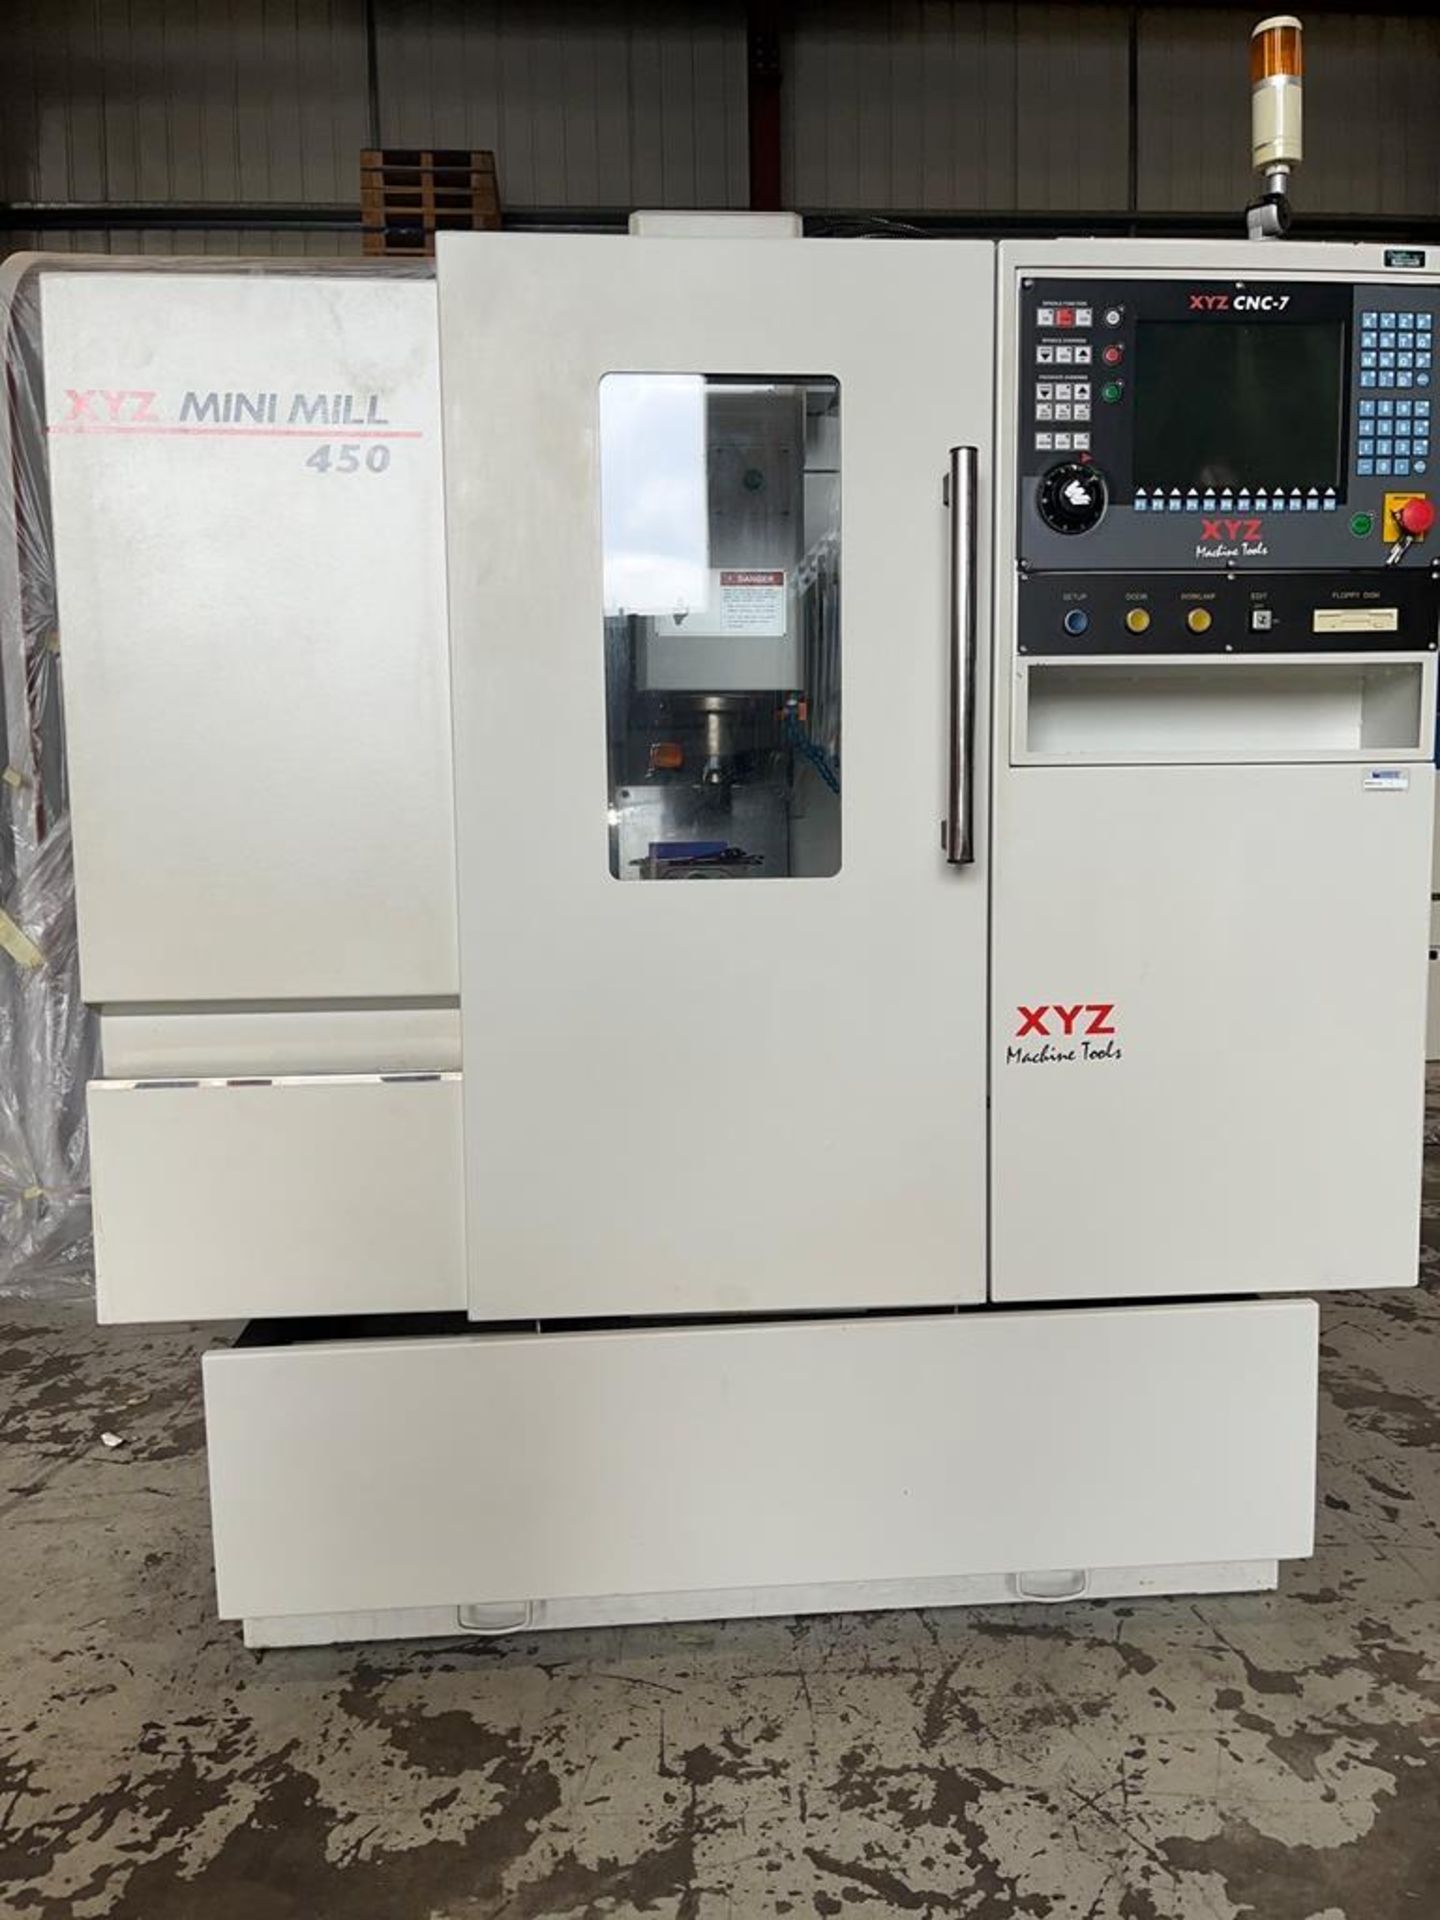 XYZ Mini Mill 450 VMC, Serial No SMX00077, Year Of Manufacture 2010